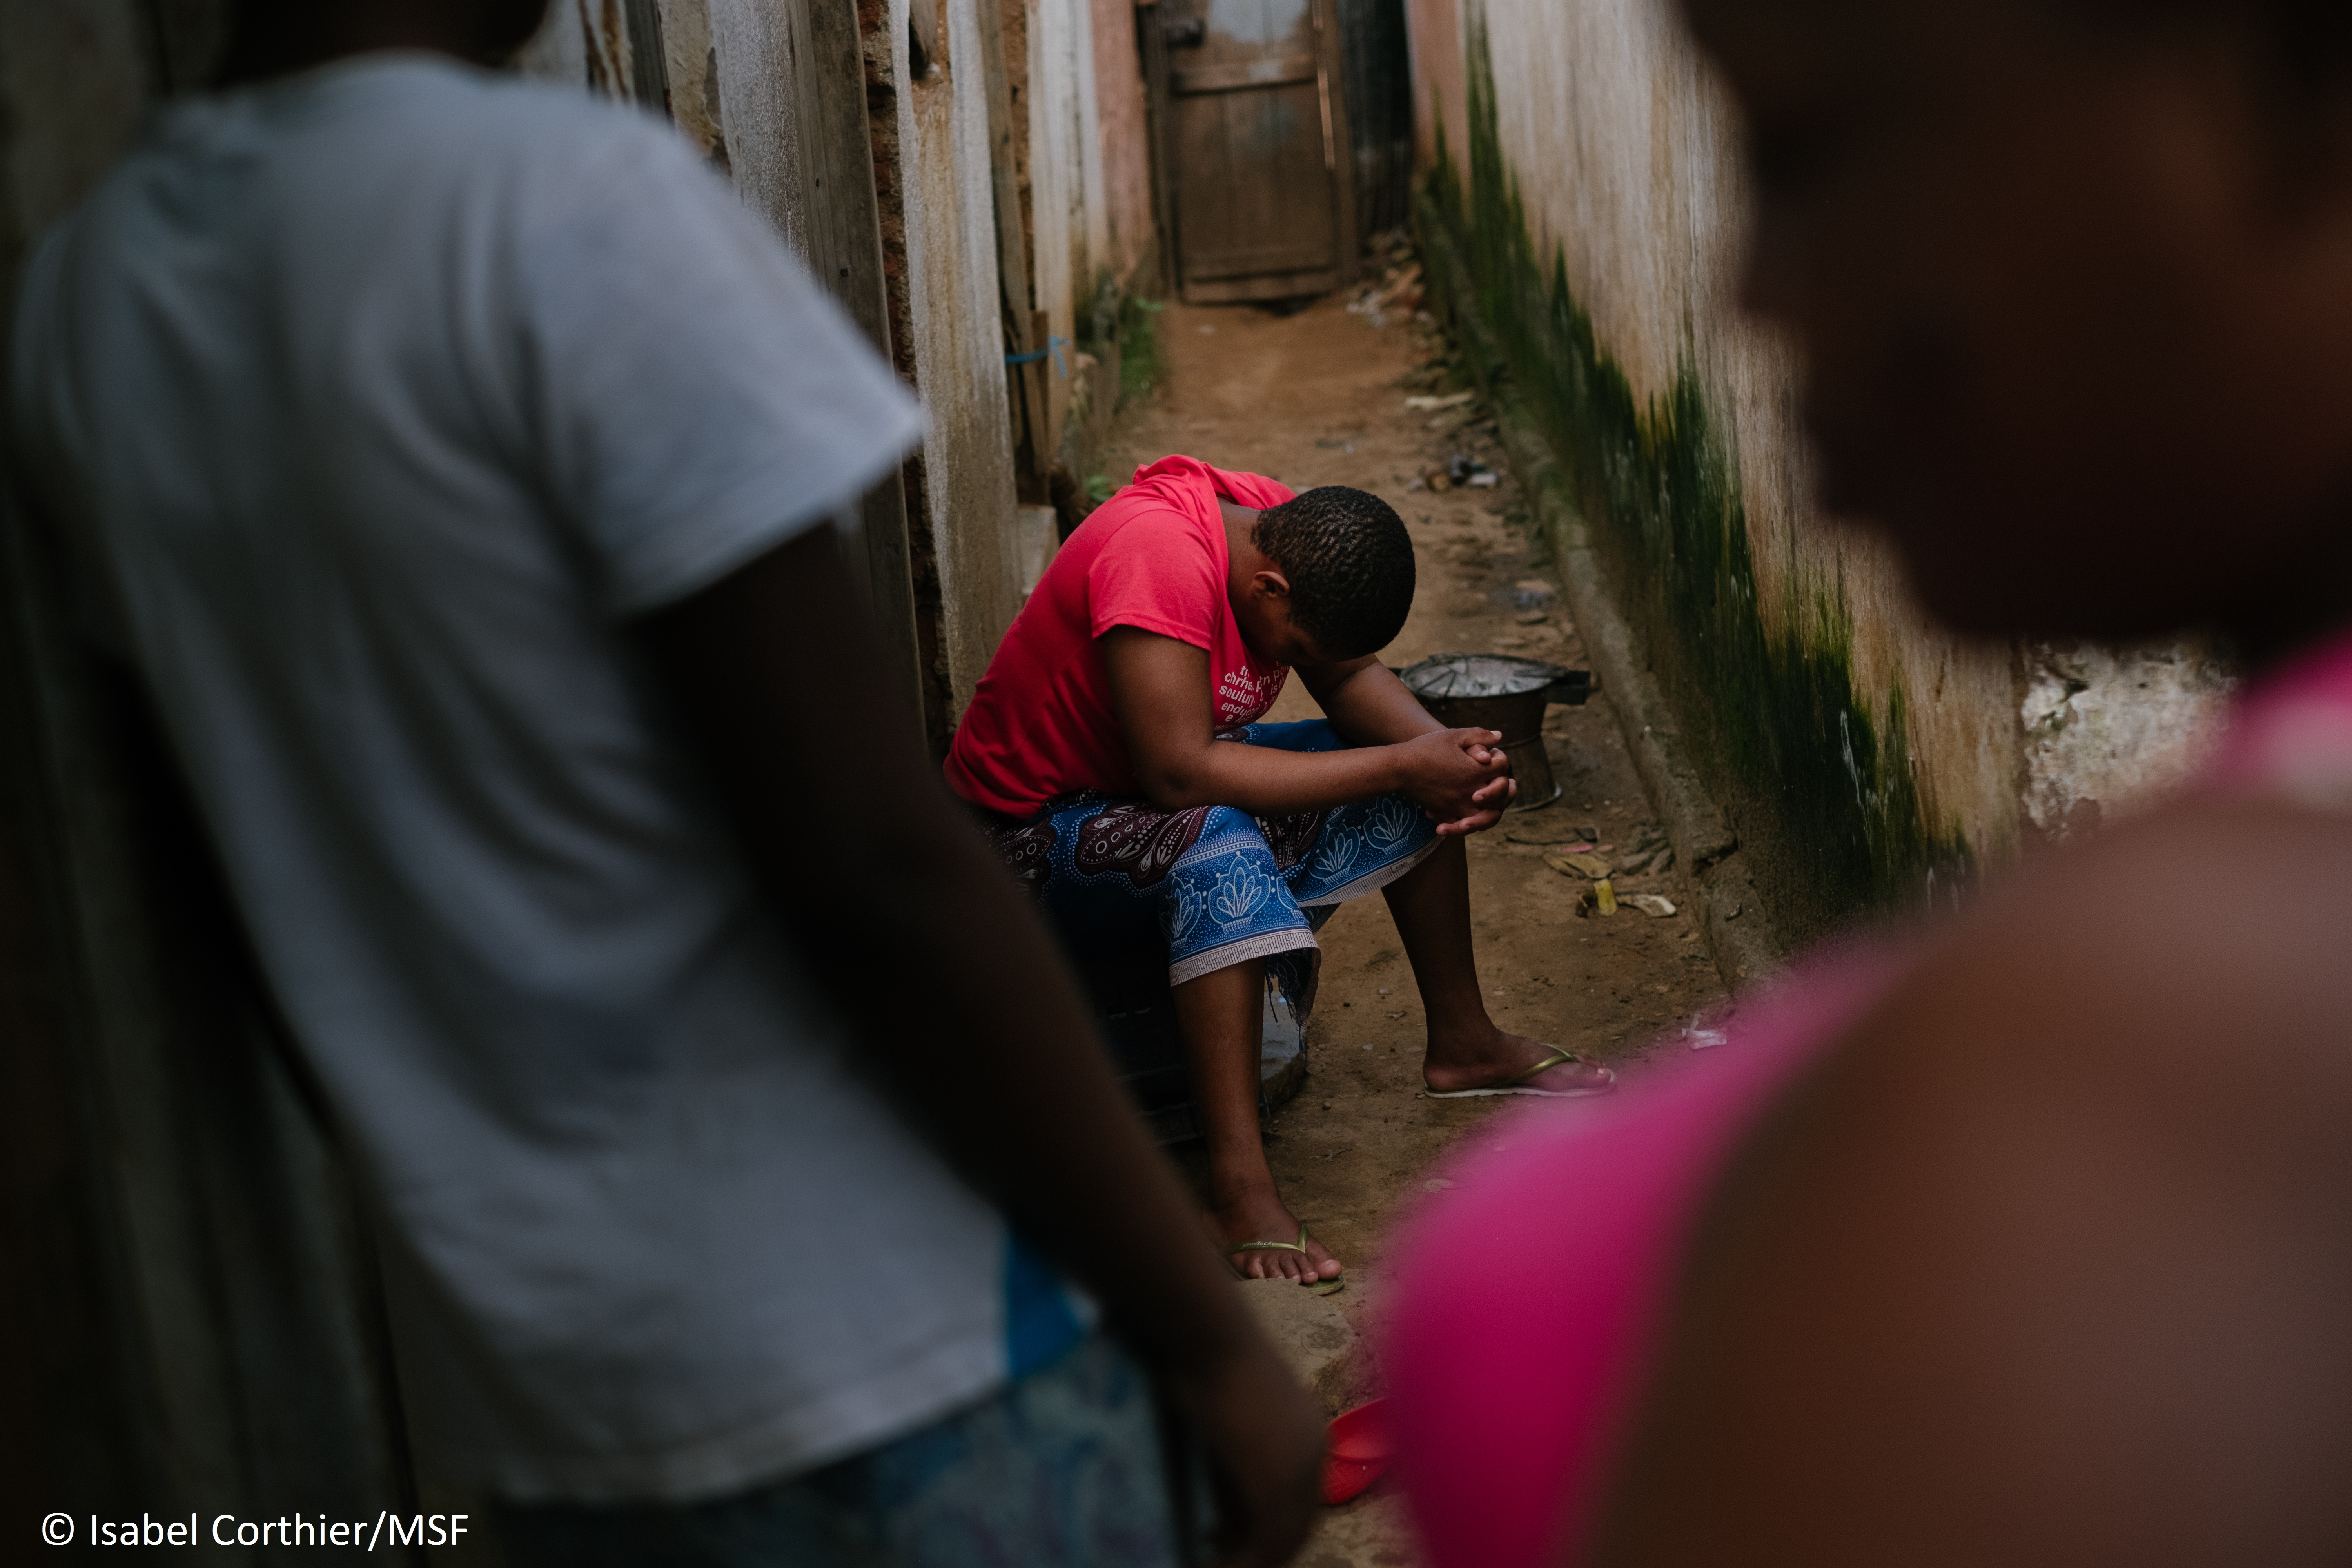 A sex worker in the alley way lined with rooms used by sex workers behind a hotspot bar in the centre of Mwanza, Malawi. Photo by Isabel Corthier/MSF.